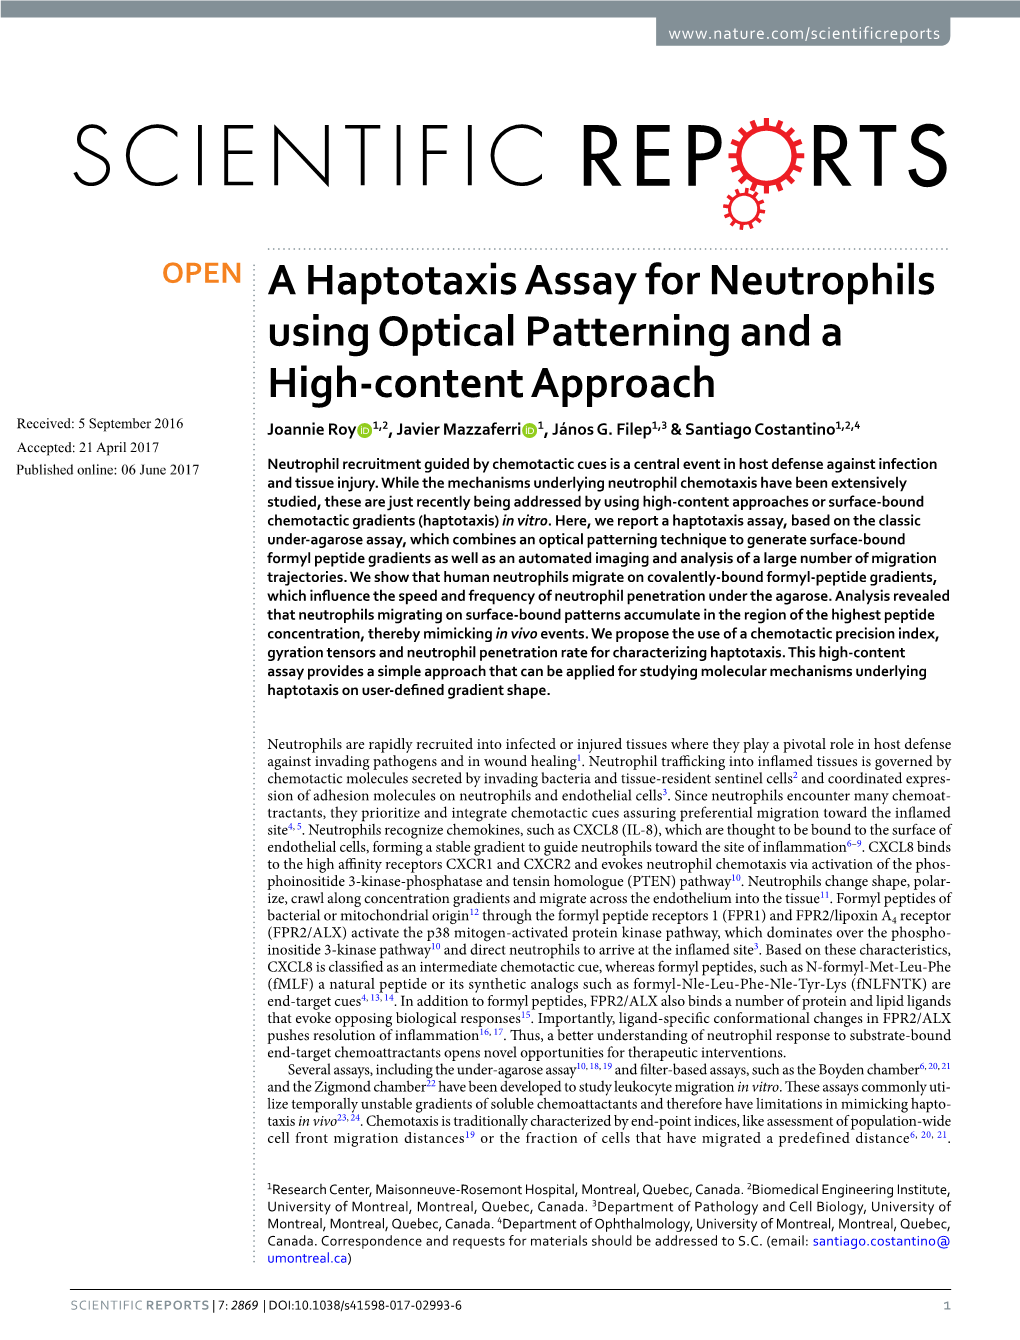 A Haptotaxis Assay for Neutrophils Using Optical Patterning and a High-Content Approach Received: 5 September 2016 Joannie Roy 1,2, Javier Mazzaferri 1, János G